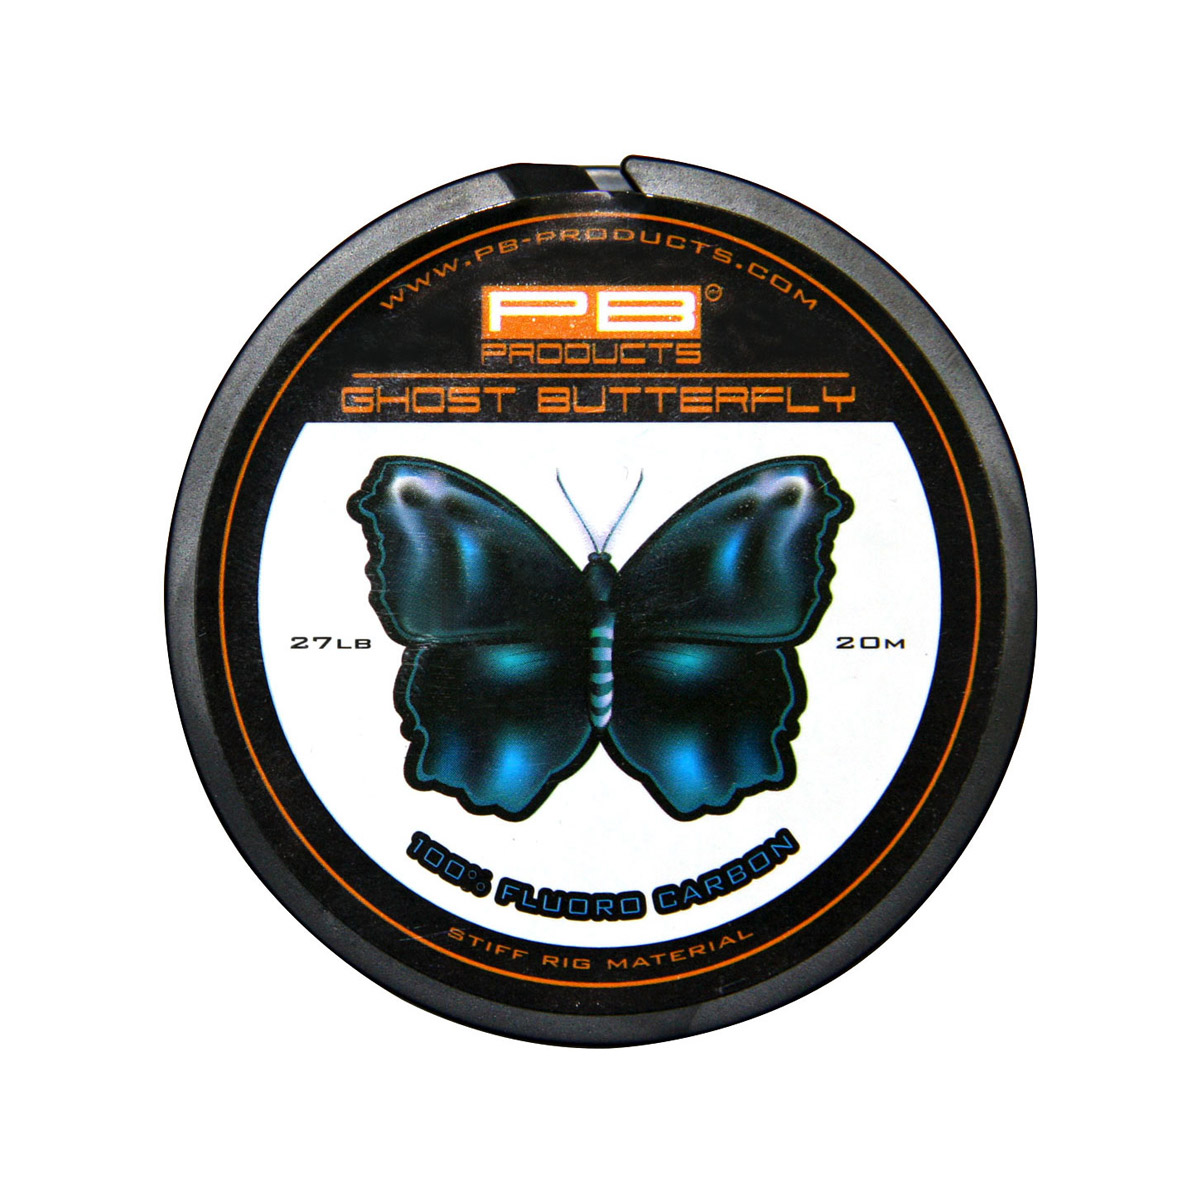 PB Products Ghost Butterfly Fluoro Corbon